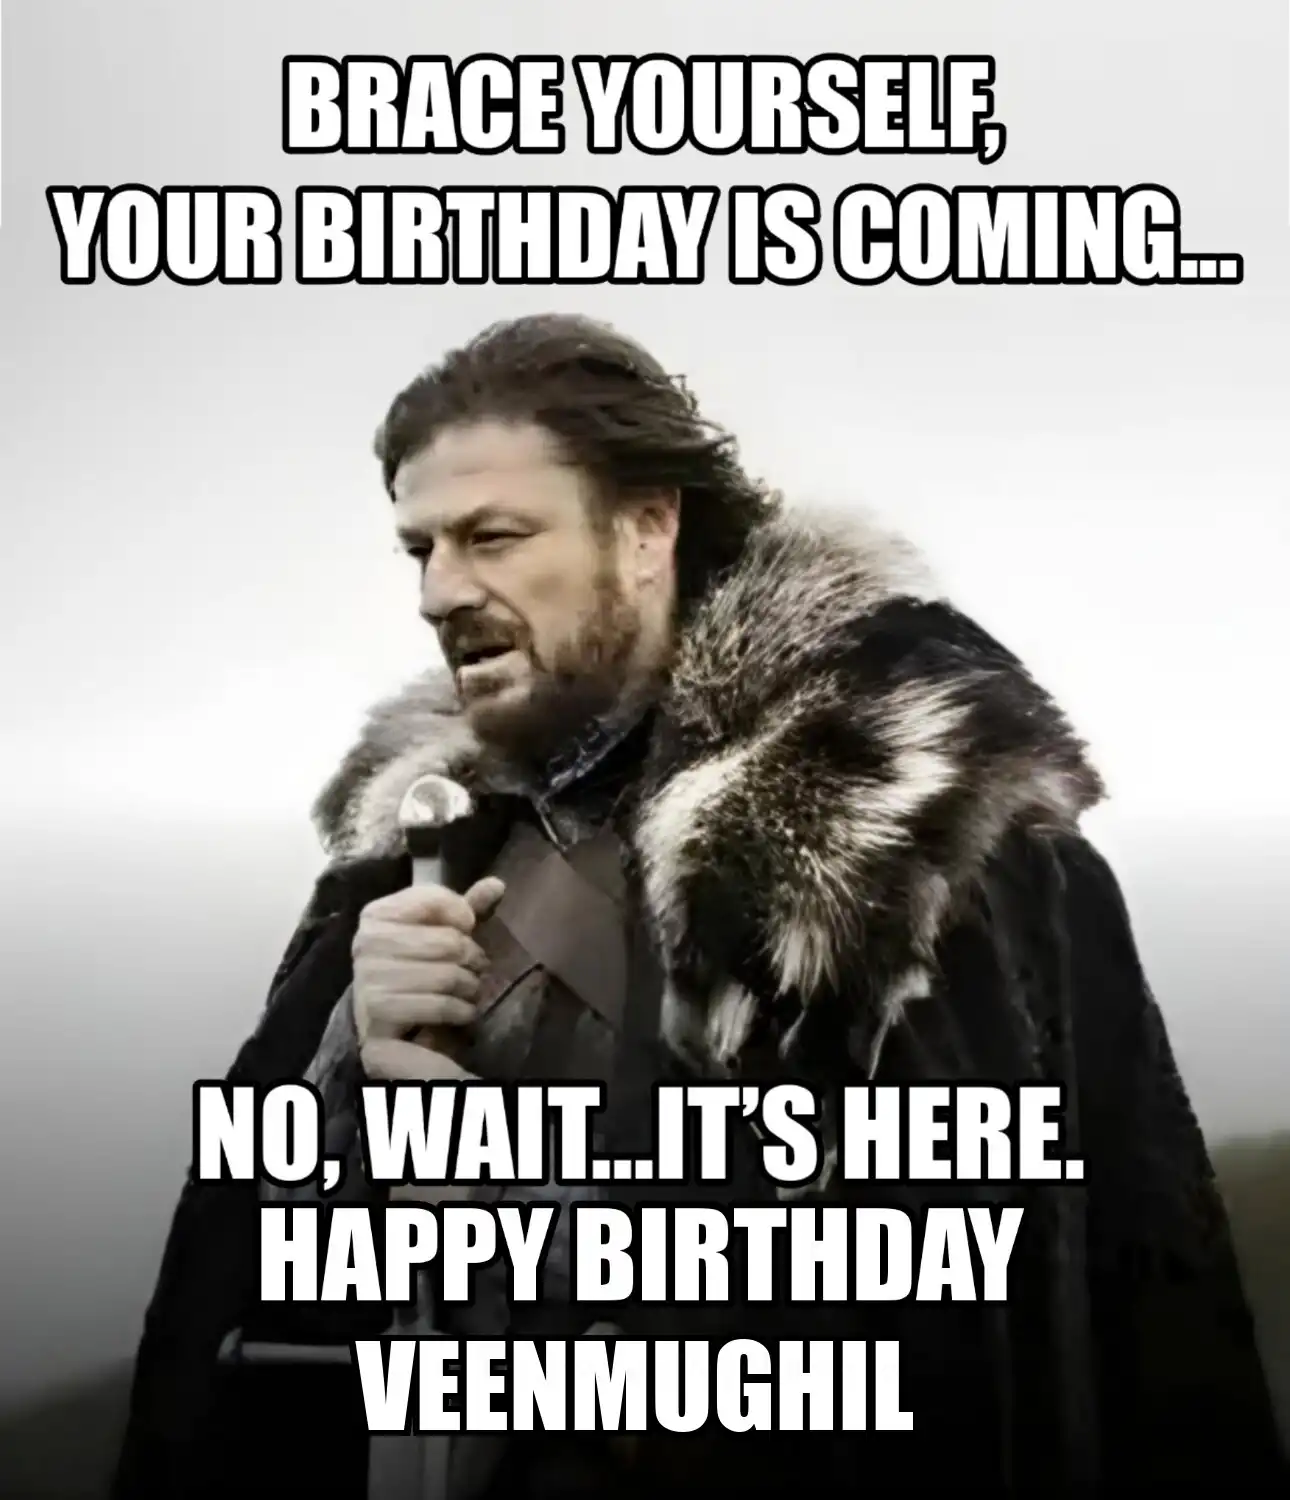 Happy Birthday Veenmughil Brace Yourself Your Birthday Is Coming Meme